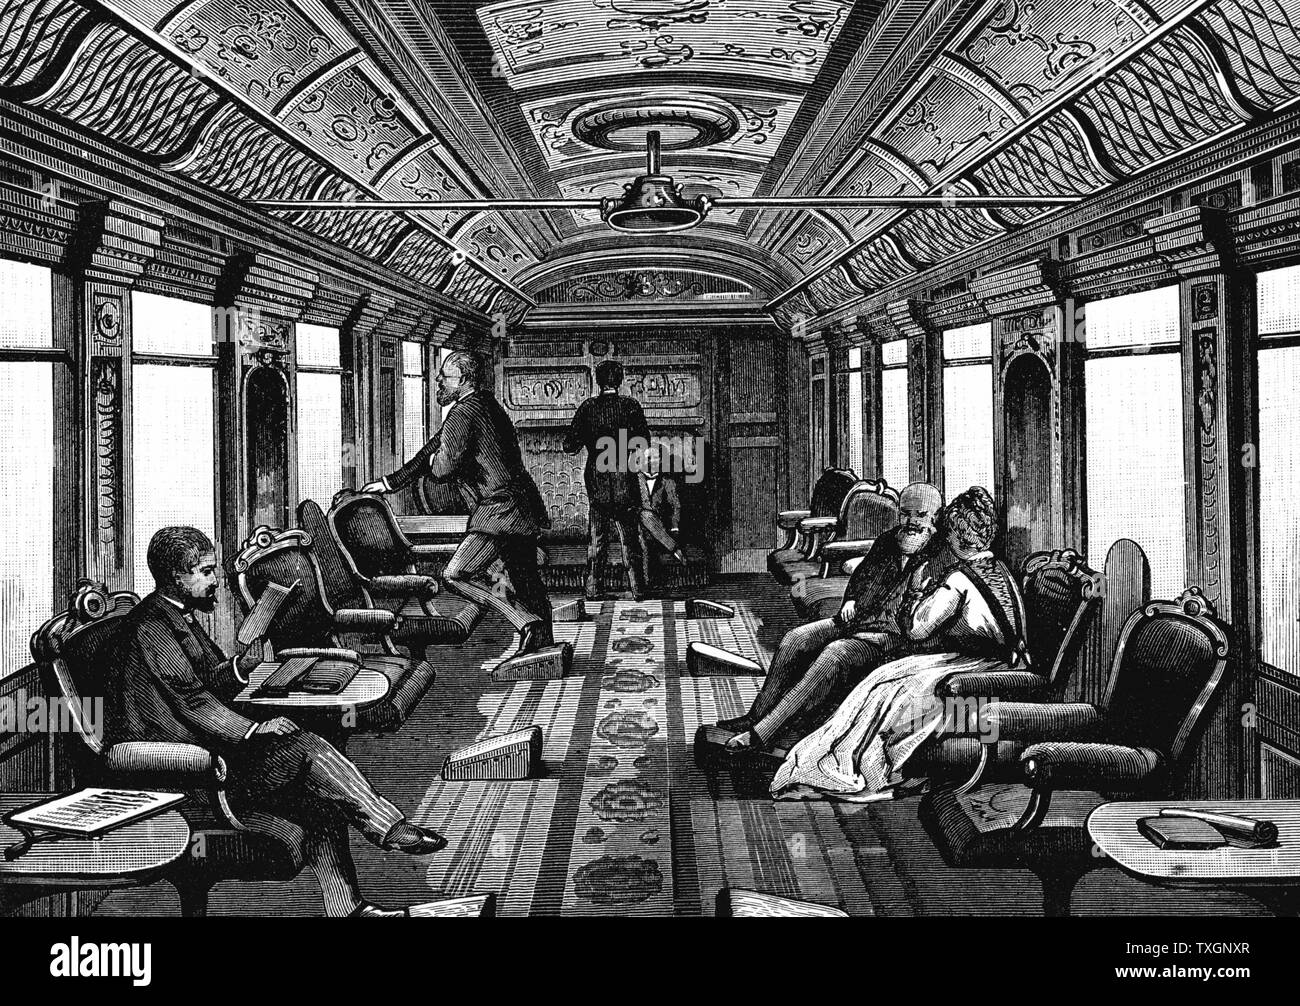 Saloon car on the Orient Express. c. 1895 Wood engraving Leipzig Stock Photo